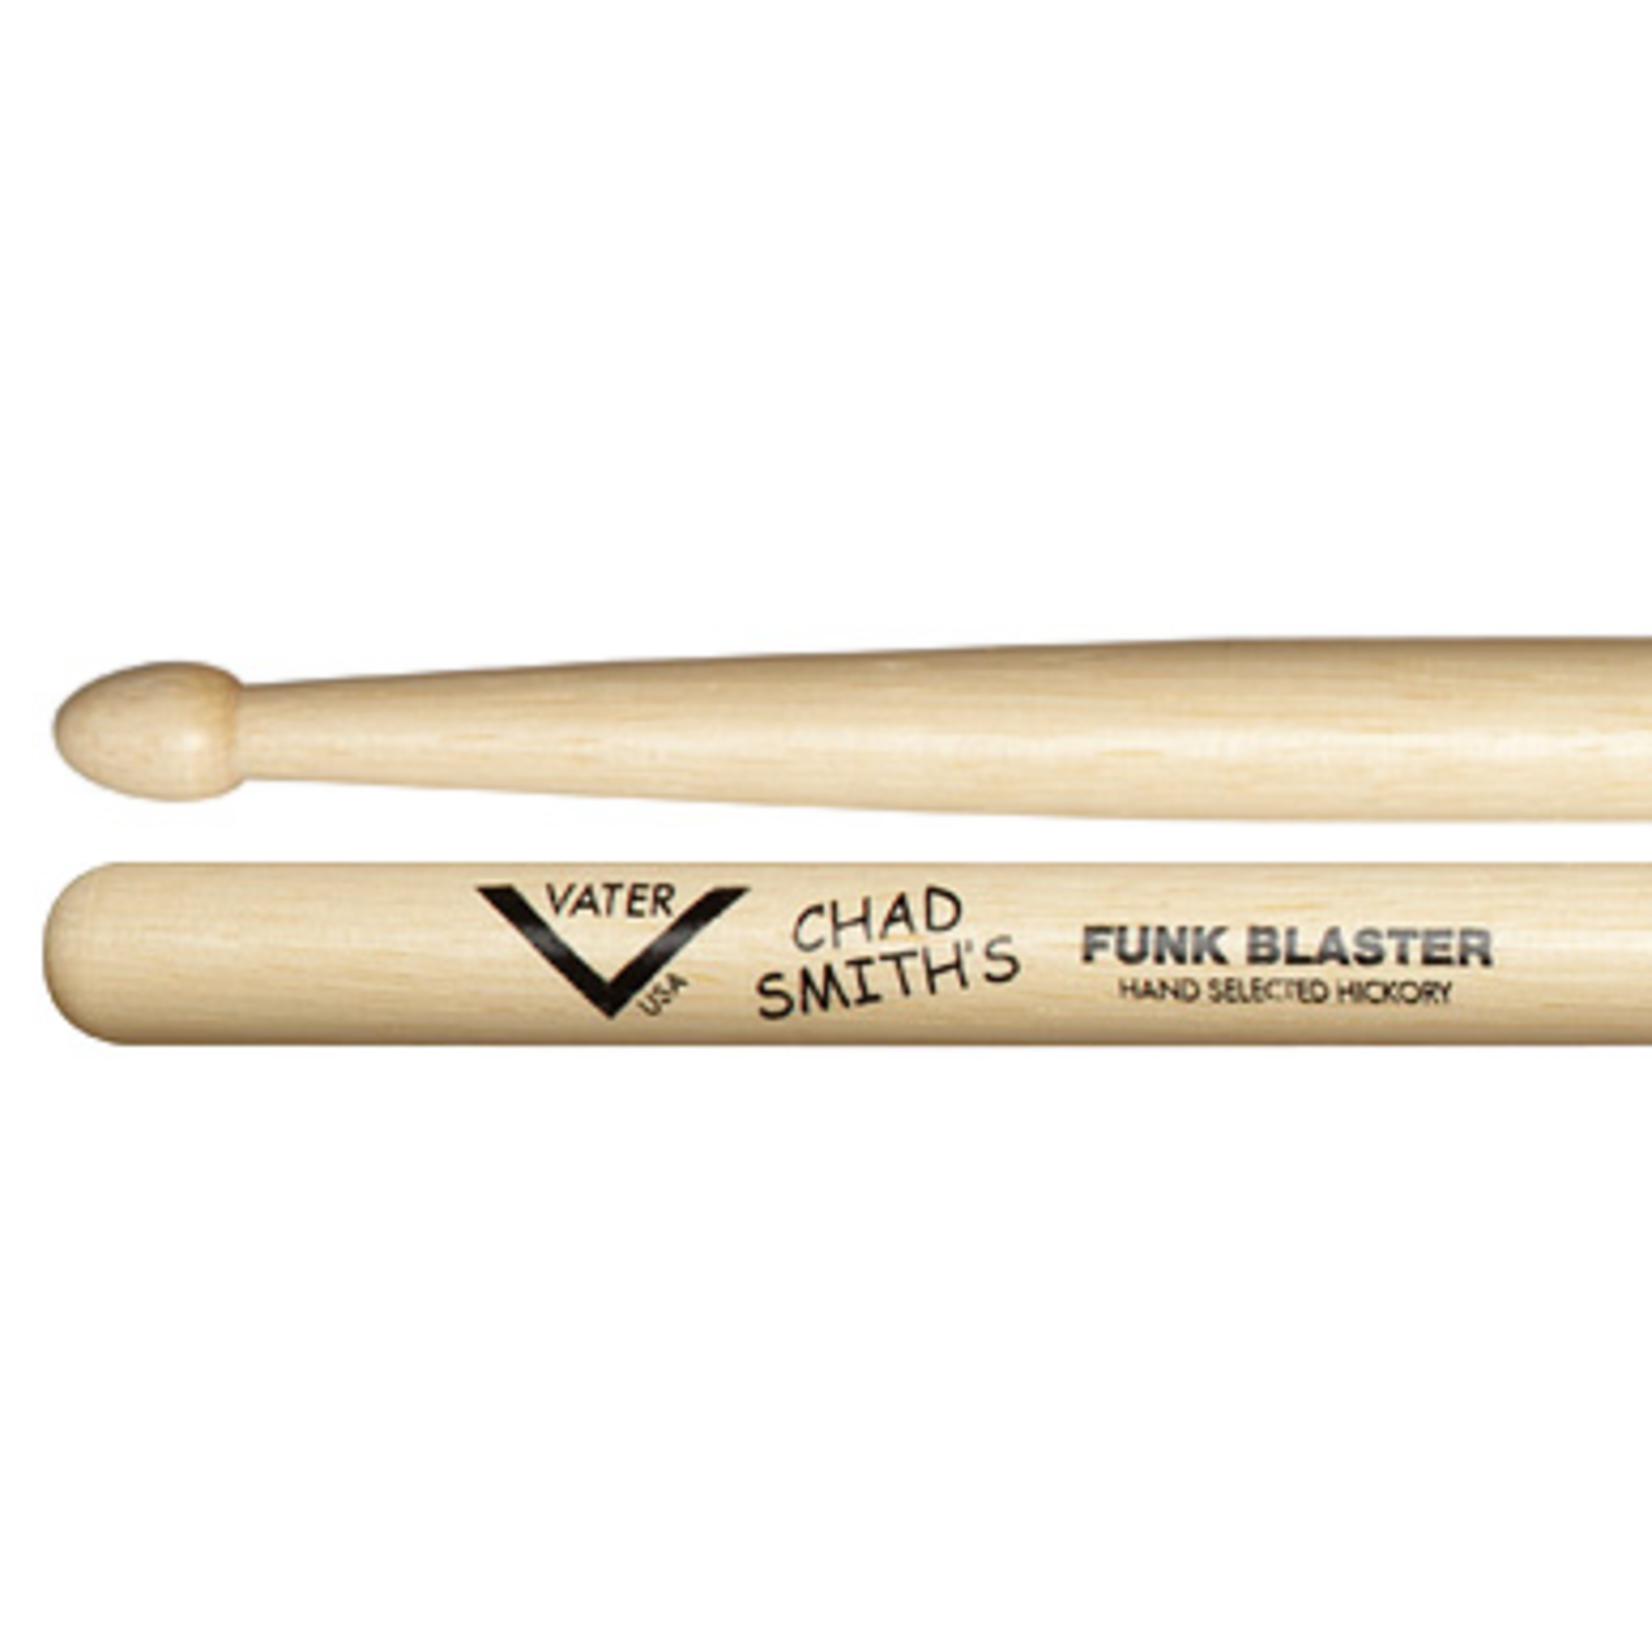 Vater Vater Chad Smith Funk Blaster Wood Tip Hickory Drumsticks Pair